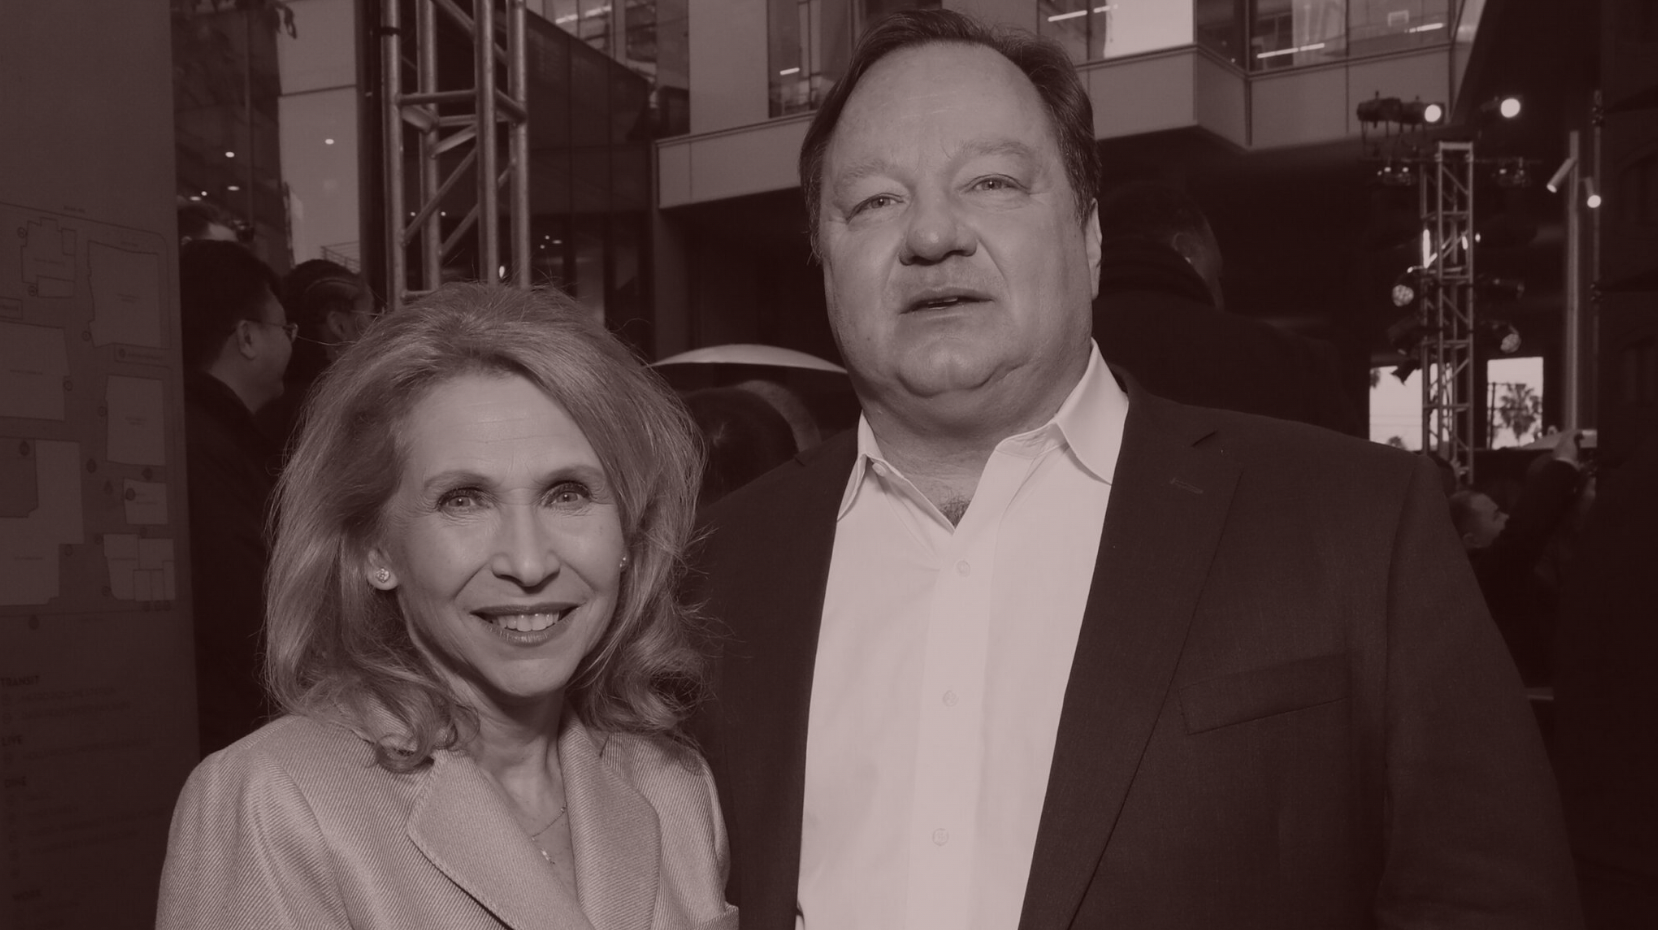 Why Won’t Shari Redstone Sell Showtime?